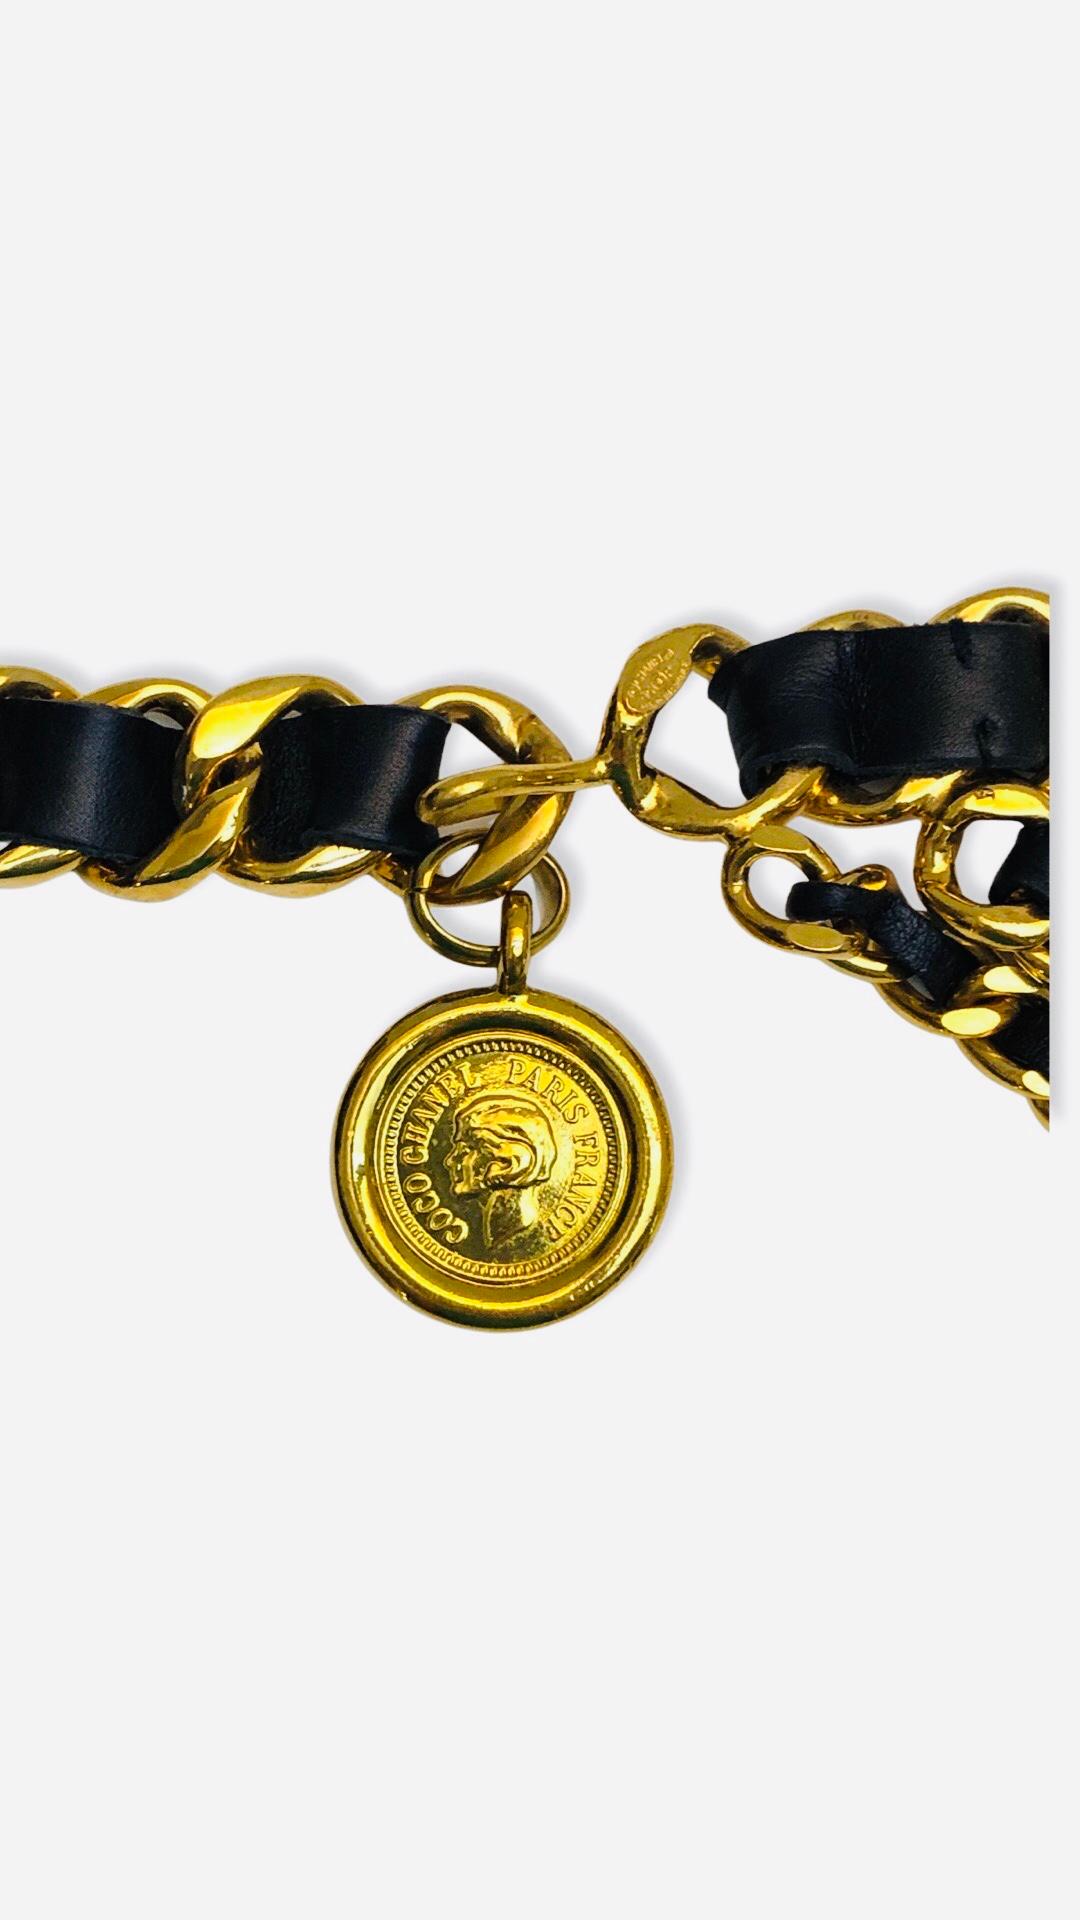 Chanel Black Lambskin Leather Gold Hardware Chain Medallion Belt In Excellent Condition For Sale In Sheung Wan, HK